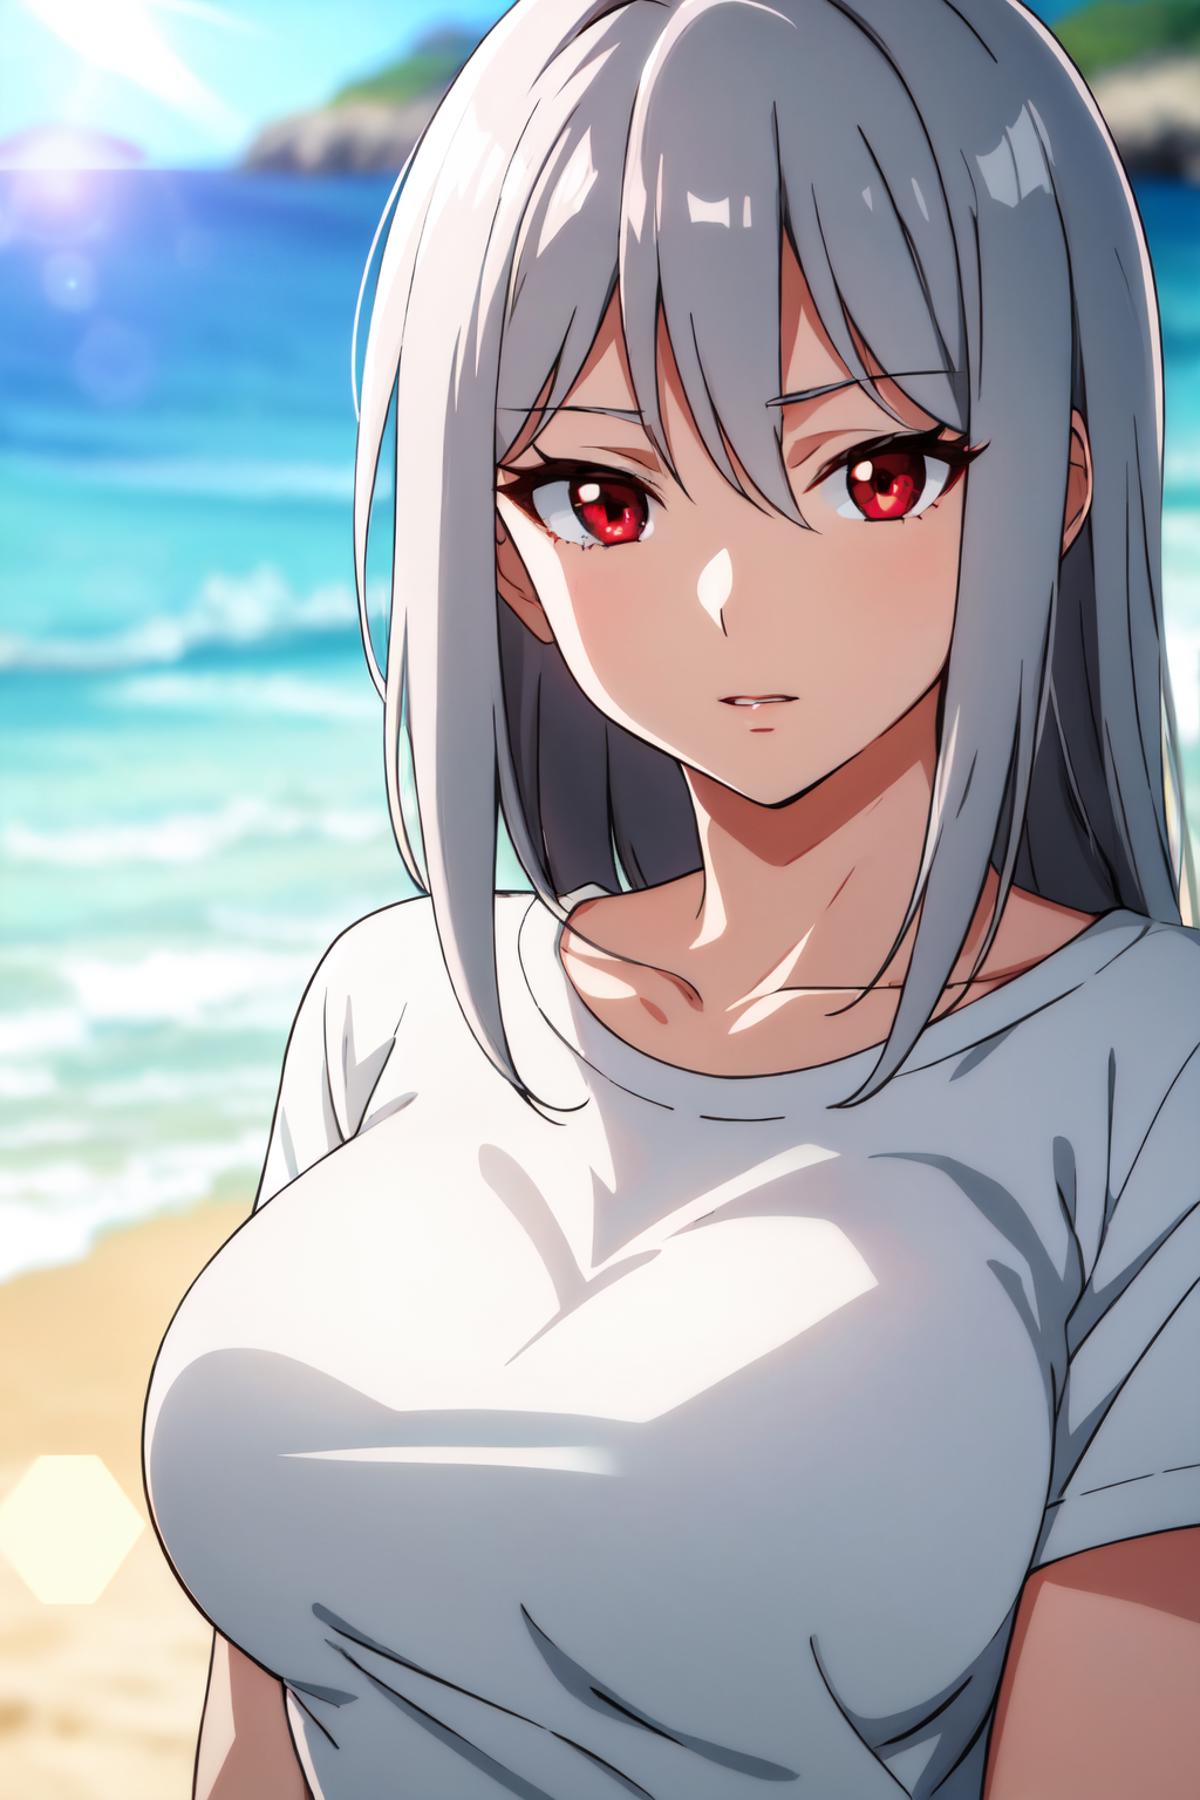 An anime character wearing a white shirt stands near the ocean.